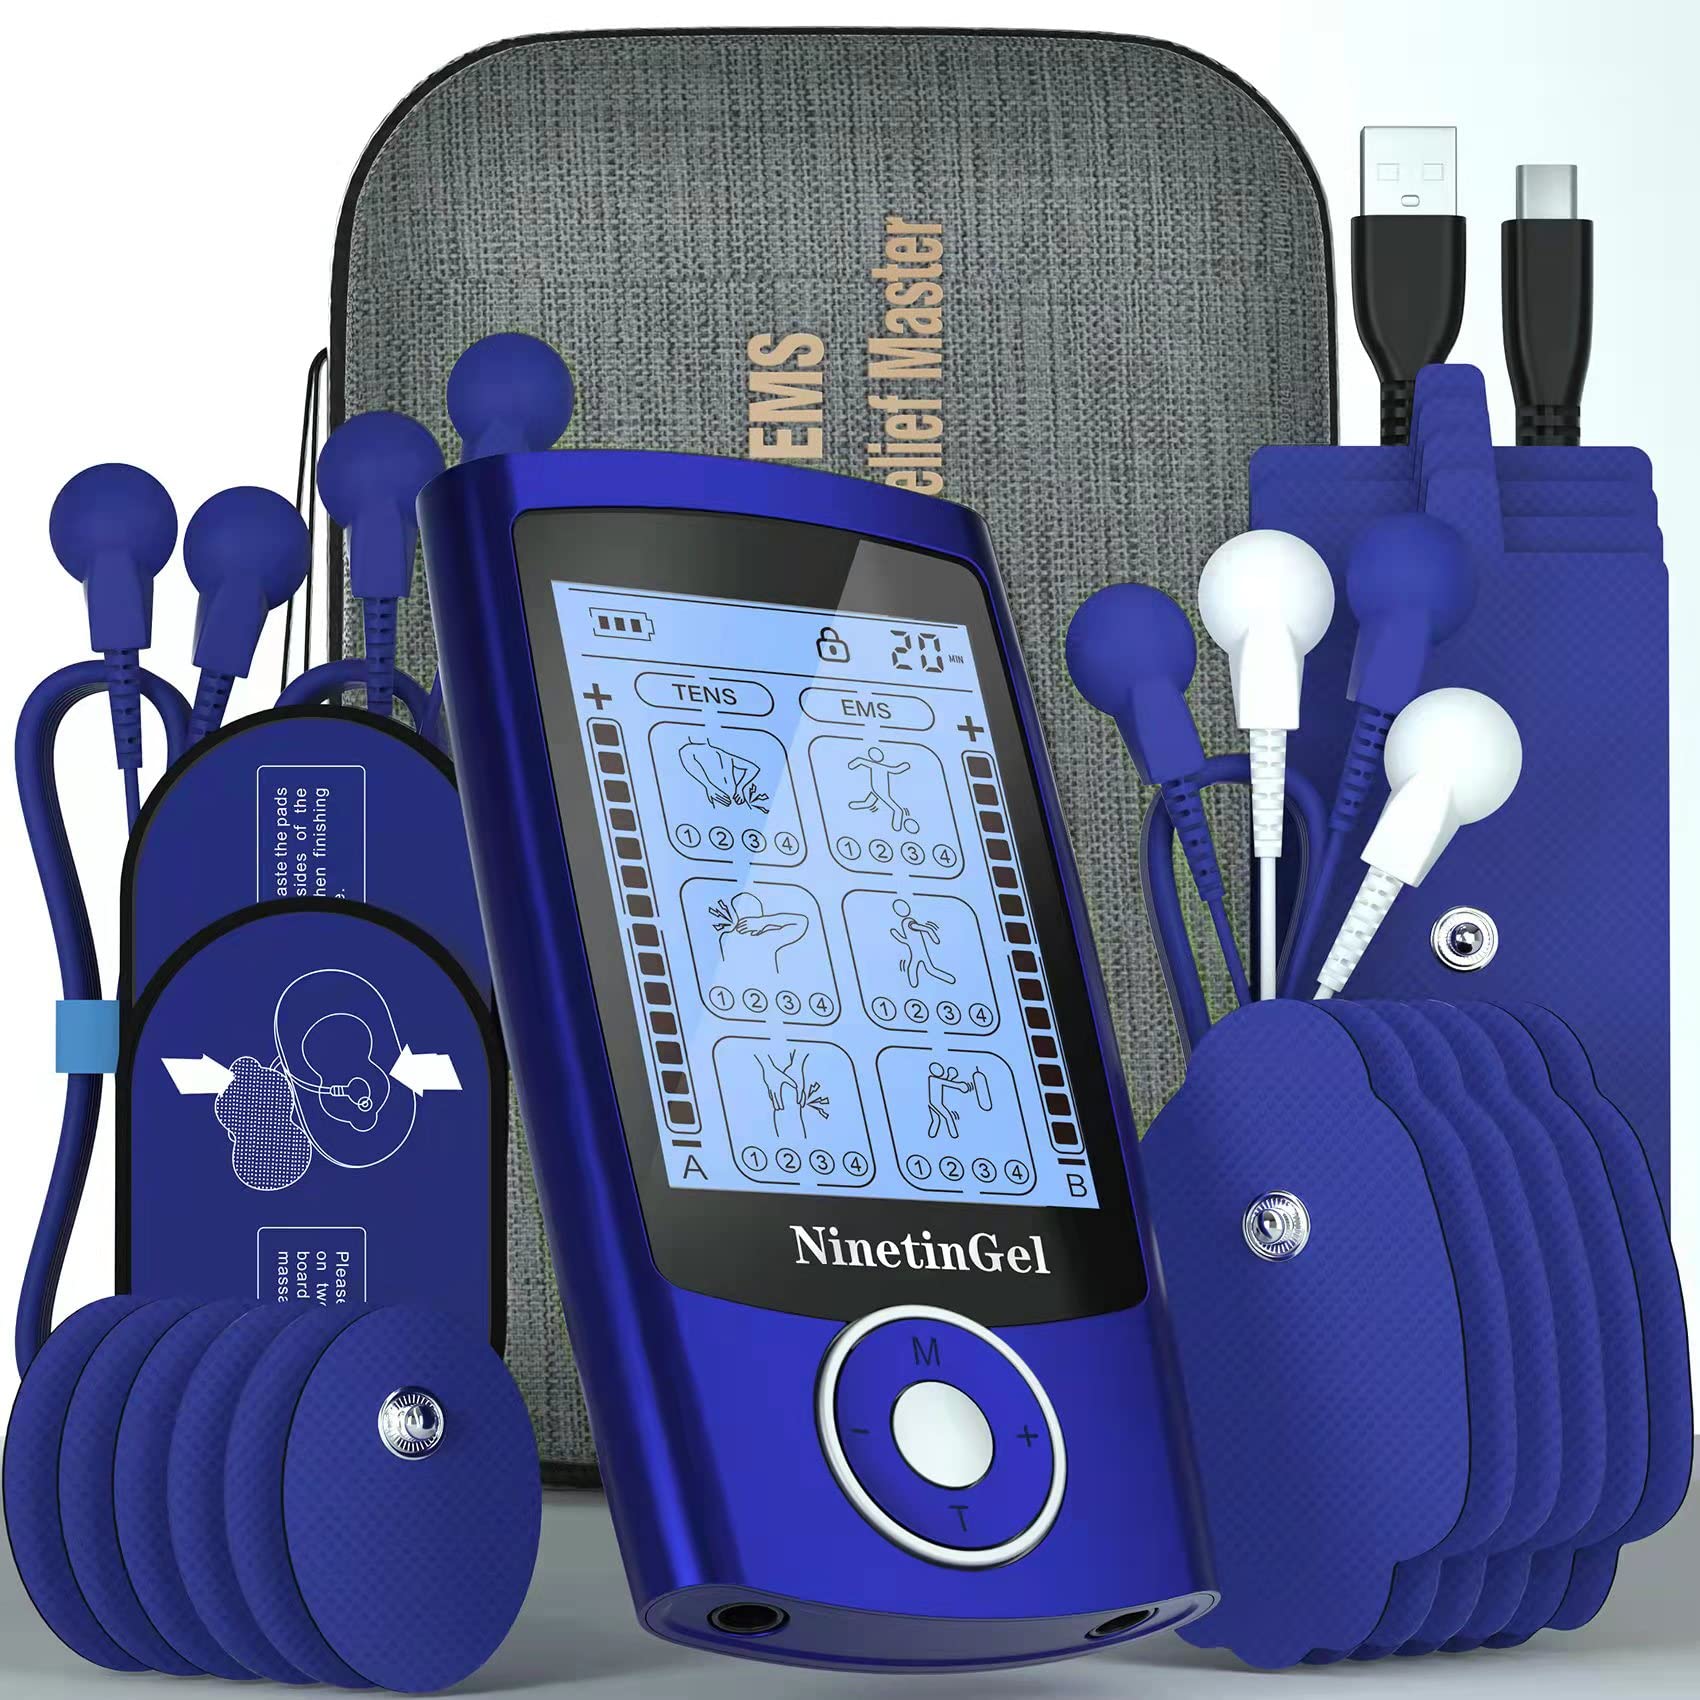 NinetinGel Tens Unit Muscle Stimulator EMS Muscle Relaxer Ab